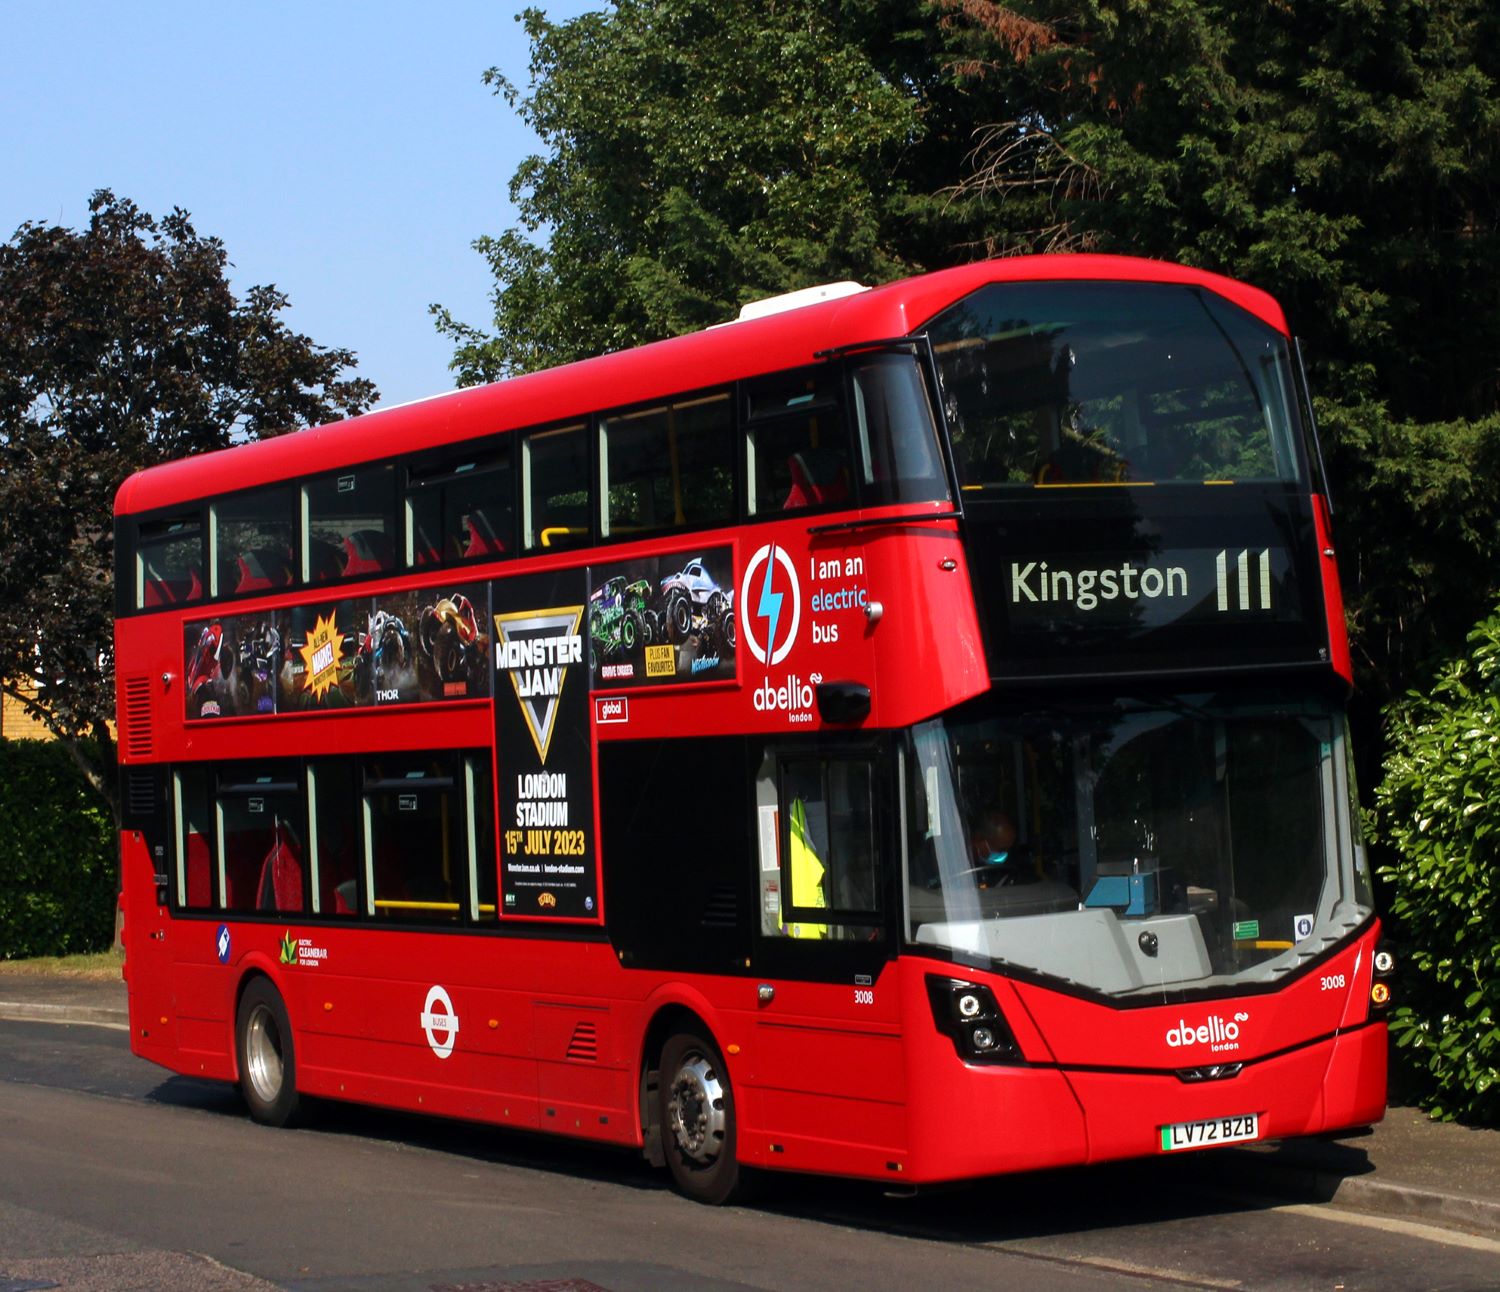 Abellio Route 111 Electronliner built by Wrightbus